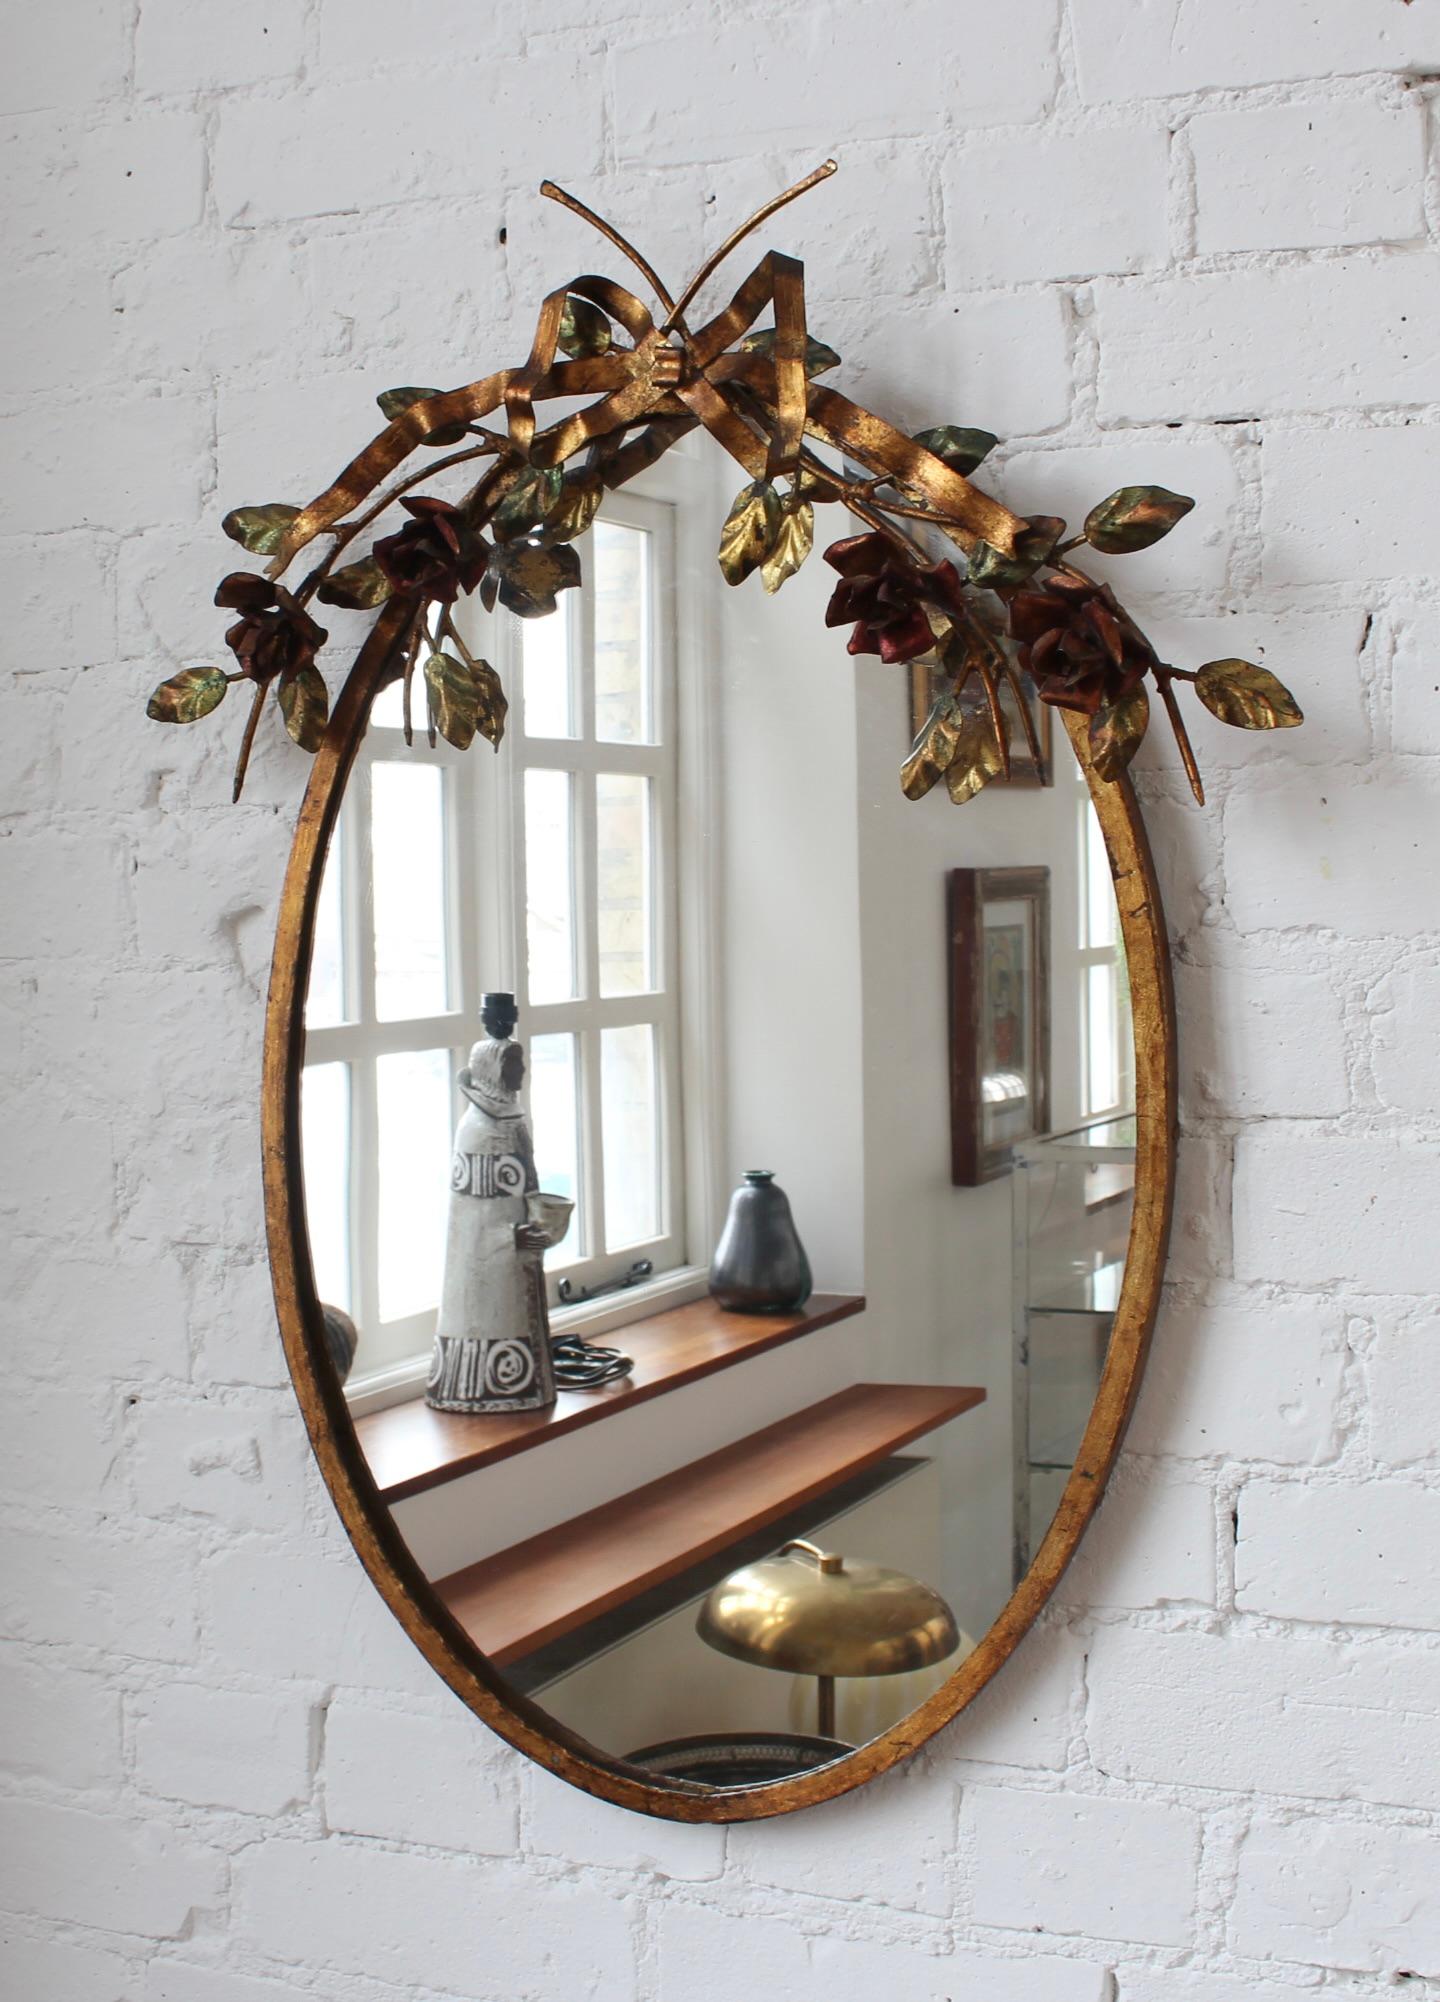 Vintage Spanish gilt metal toleware wall mirror (circa 1970s). The Spanish excel at making beautiful toleware pieces which are decoratively painted and gilded enamelled metal ware. This gorgeous mirror is topped by a toleware flower and ribbon